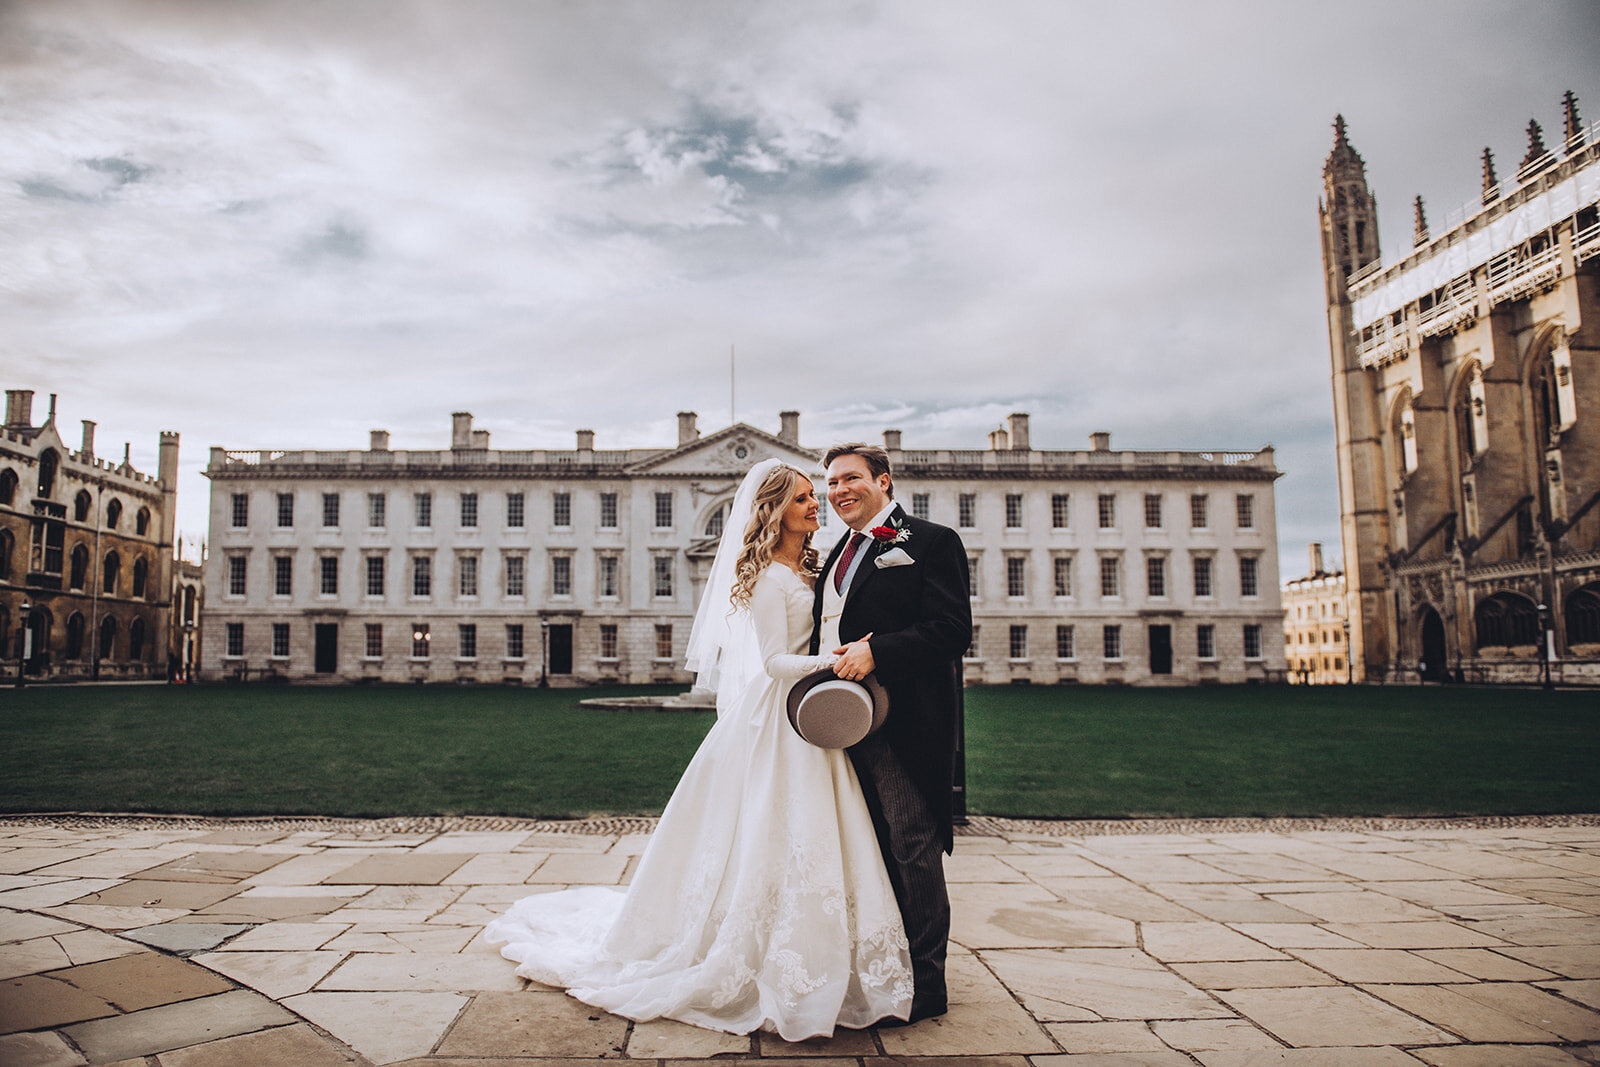 Bride and groom embracing within the grounds of Kings College Cambridge